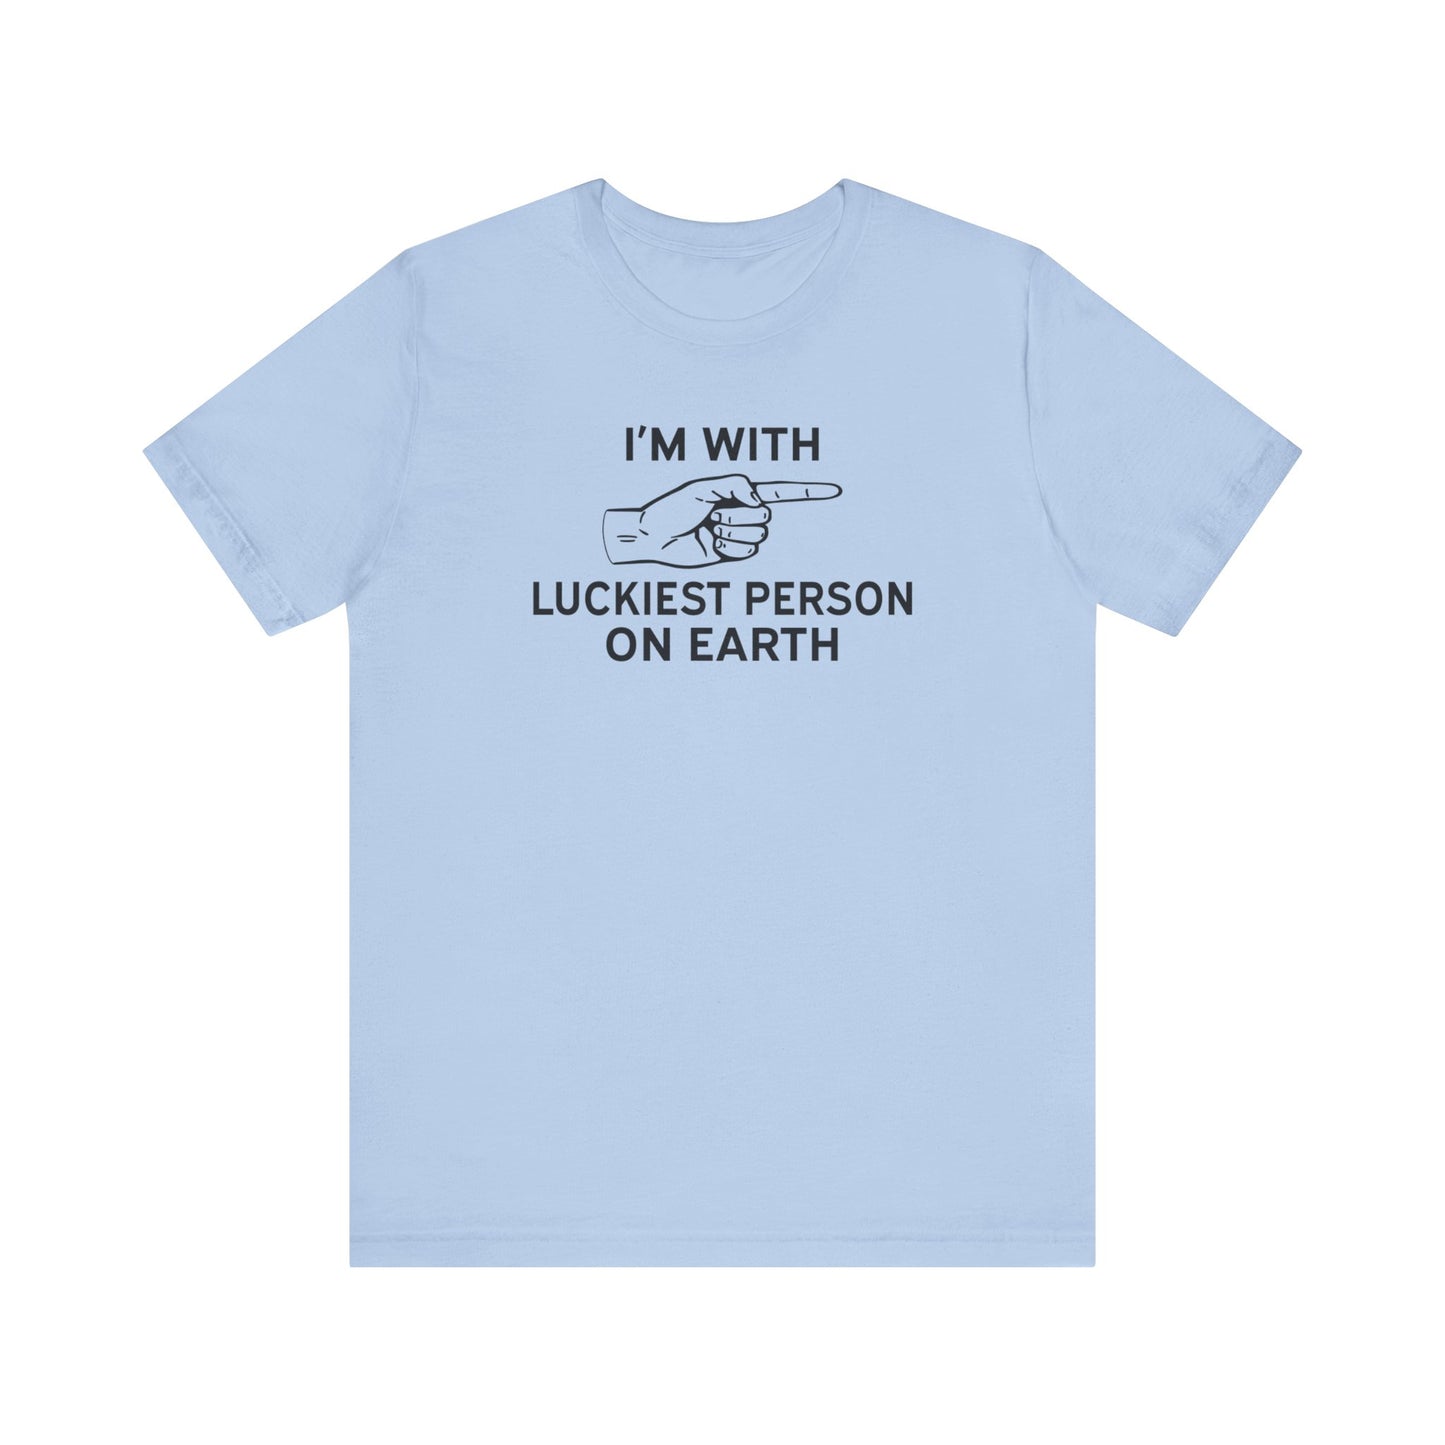 I'm With Luckiest Person on Earth - Unisex T-Shirt